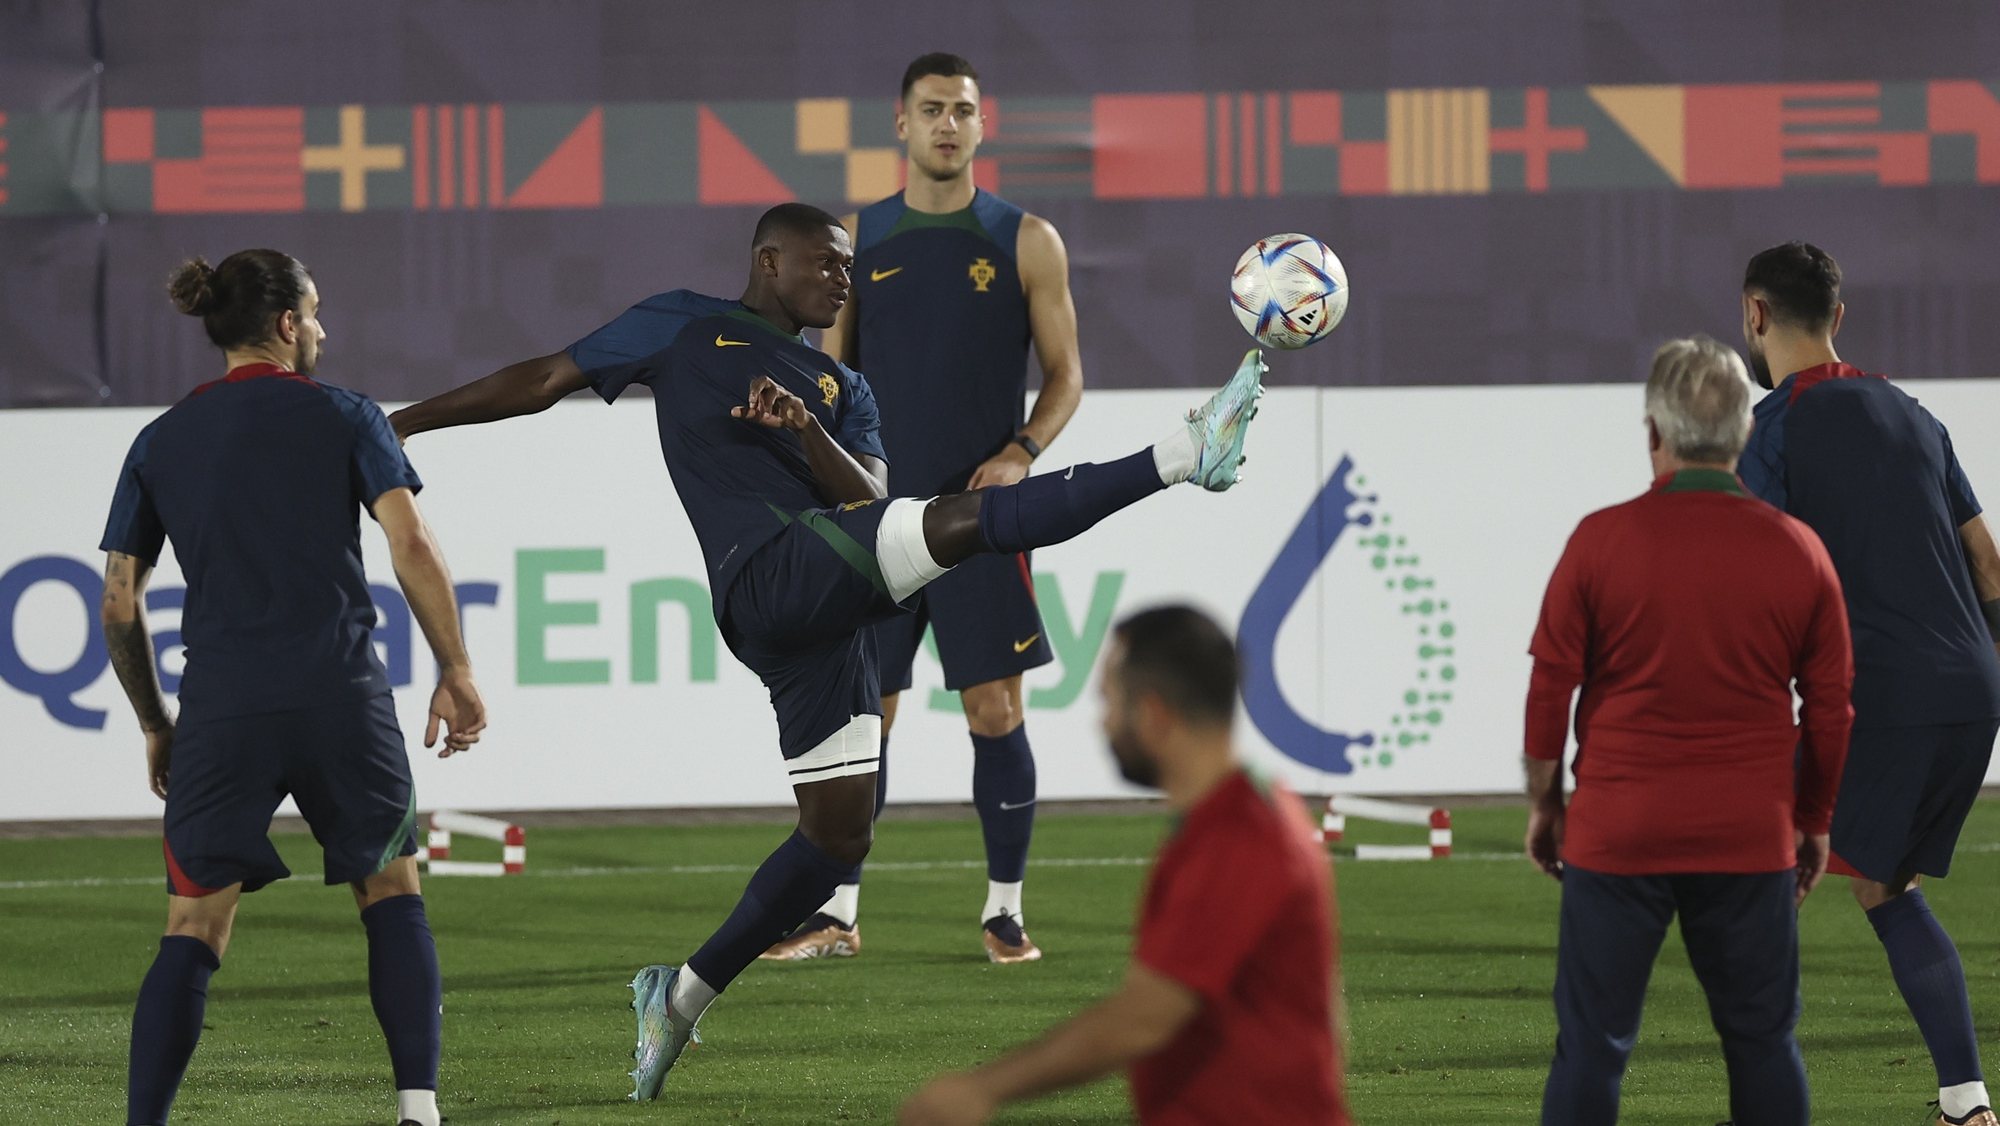 Portugal National team players attends a training session, in Al-Shahaniya, Qatar, 27 November 2022. The FIFA World Cup 2022 takes place in Qatar from 20 November untill 18 December 2022. JOSE SENA GOULAO/LUSA